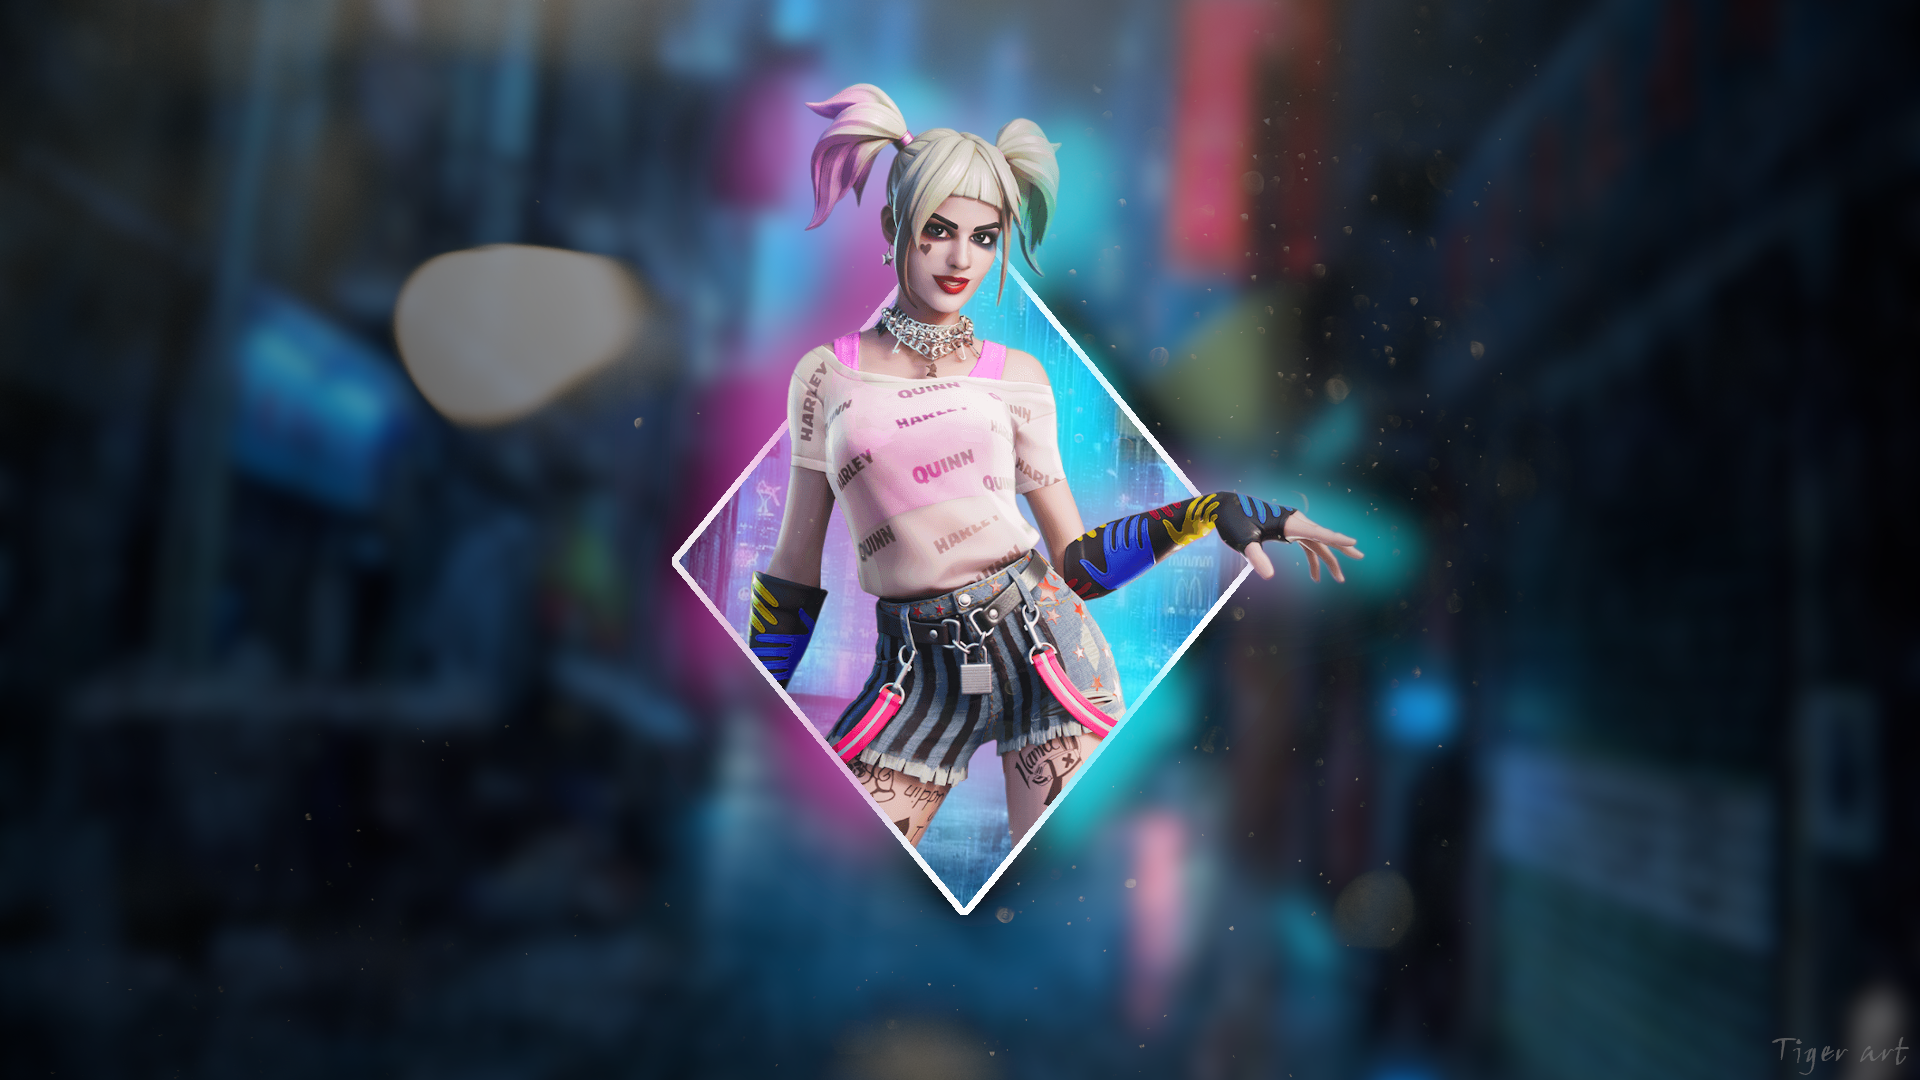 General 1920x1080 Harley Quinn Fortnite picture-in-picture video games Epic Games DC Comics